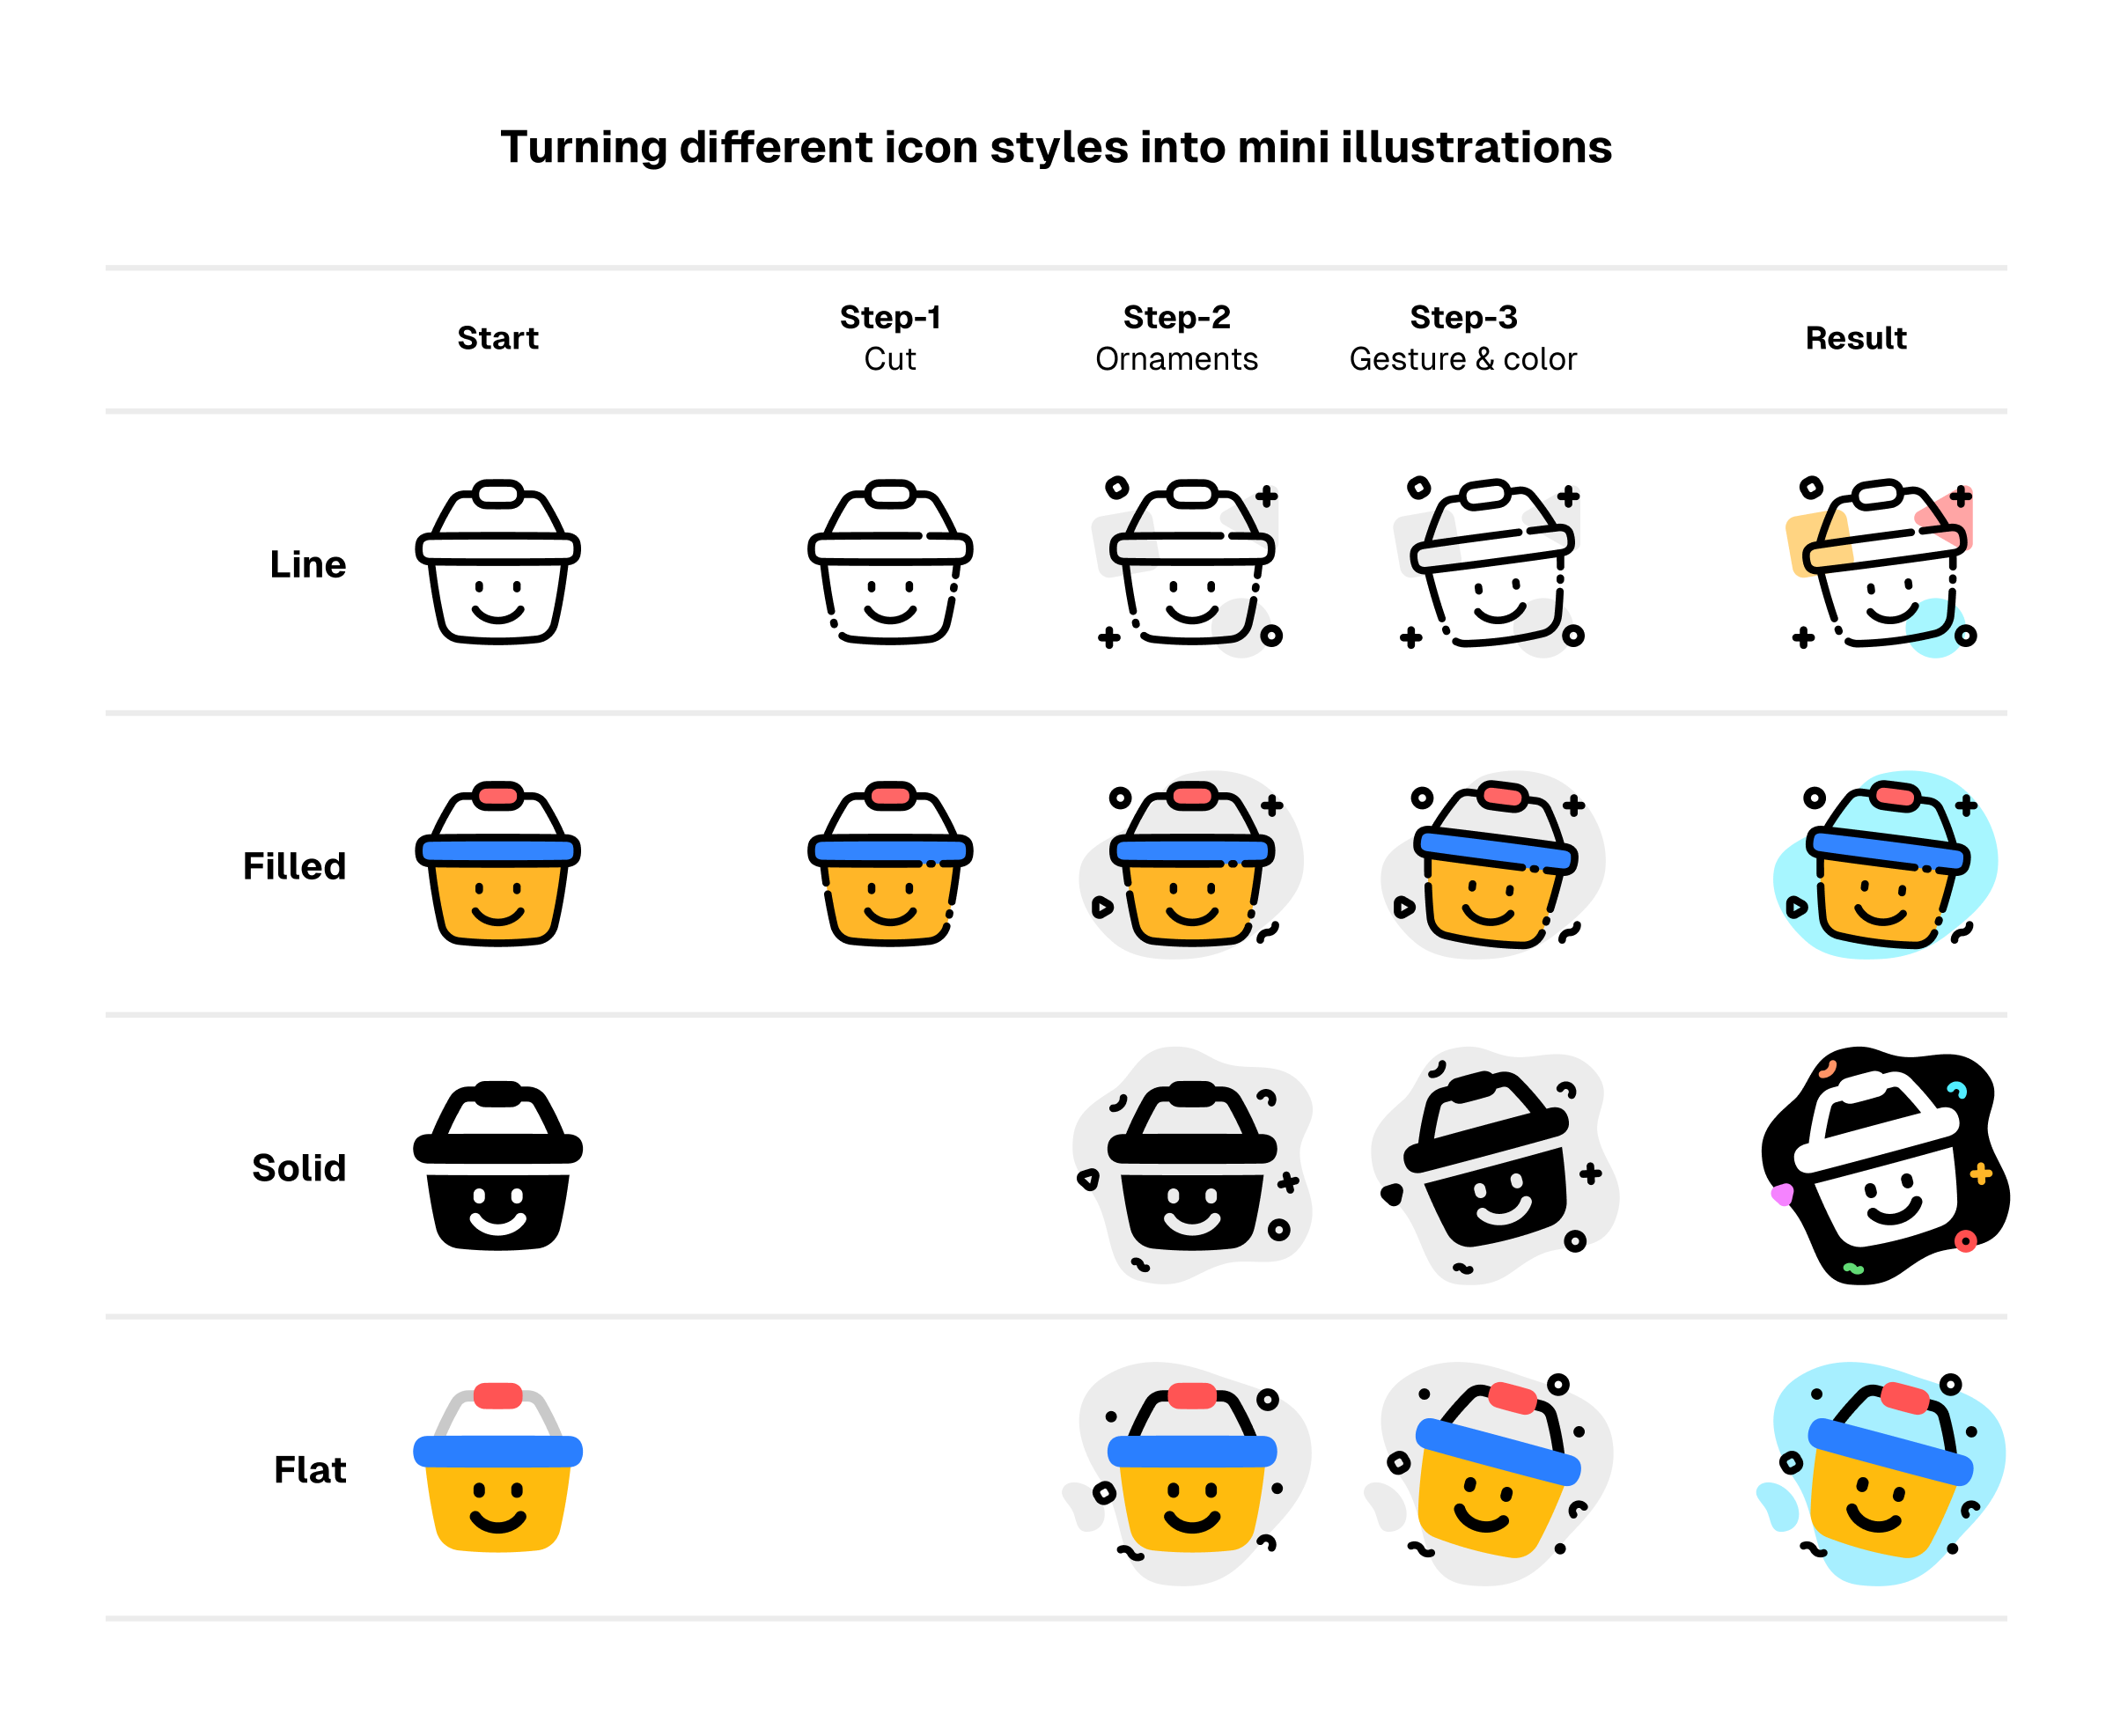 Simple steps to turn icons into mini illustrations